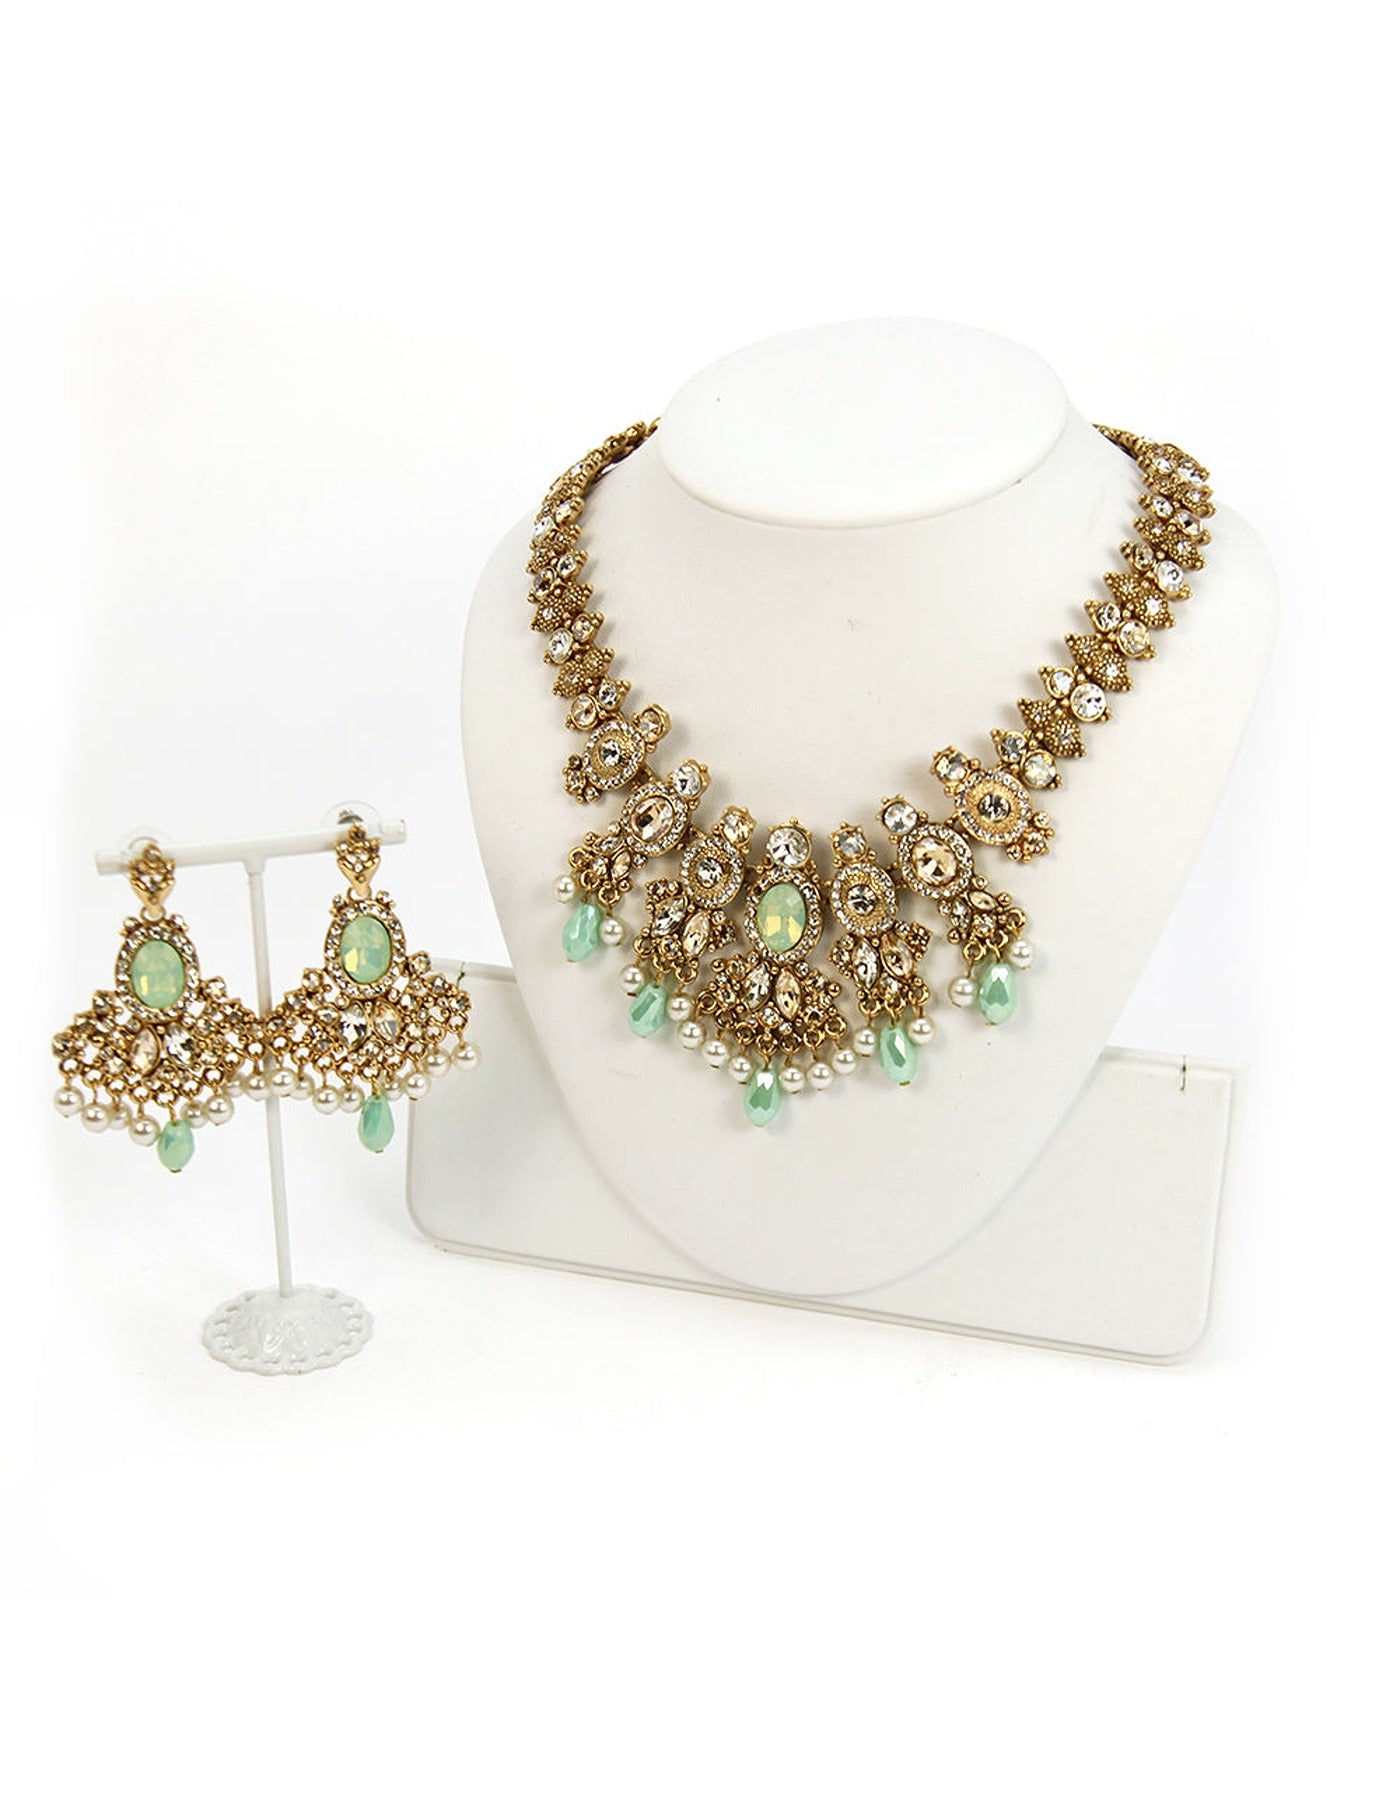 Antique Gold Jewelry with Crystal Golden Shadow and Chrysolite Opal Stones